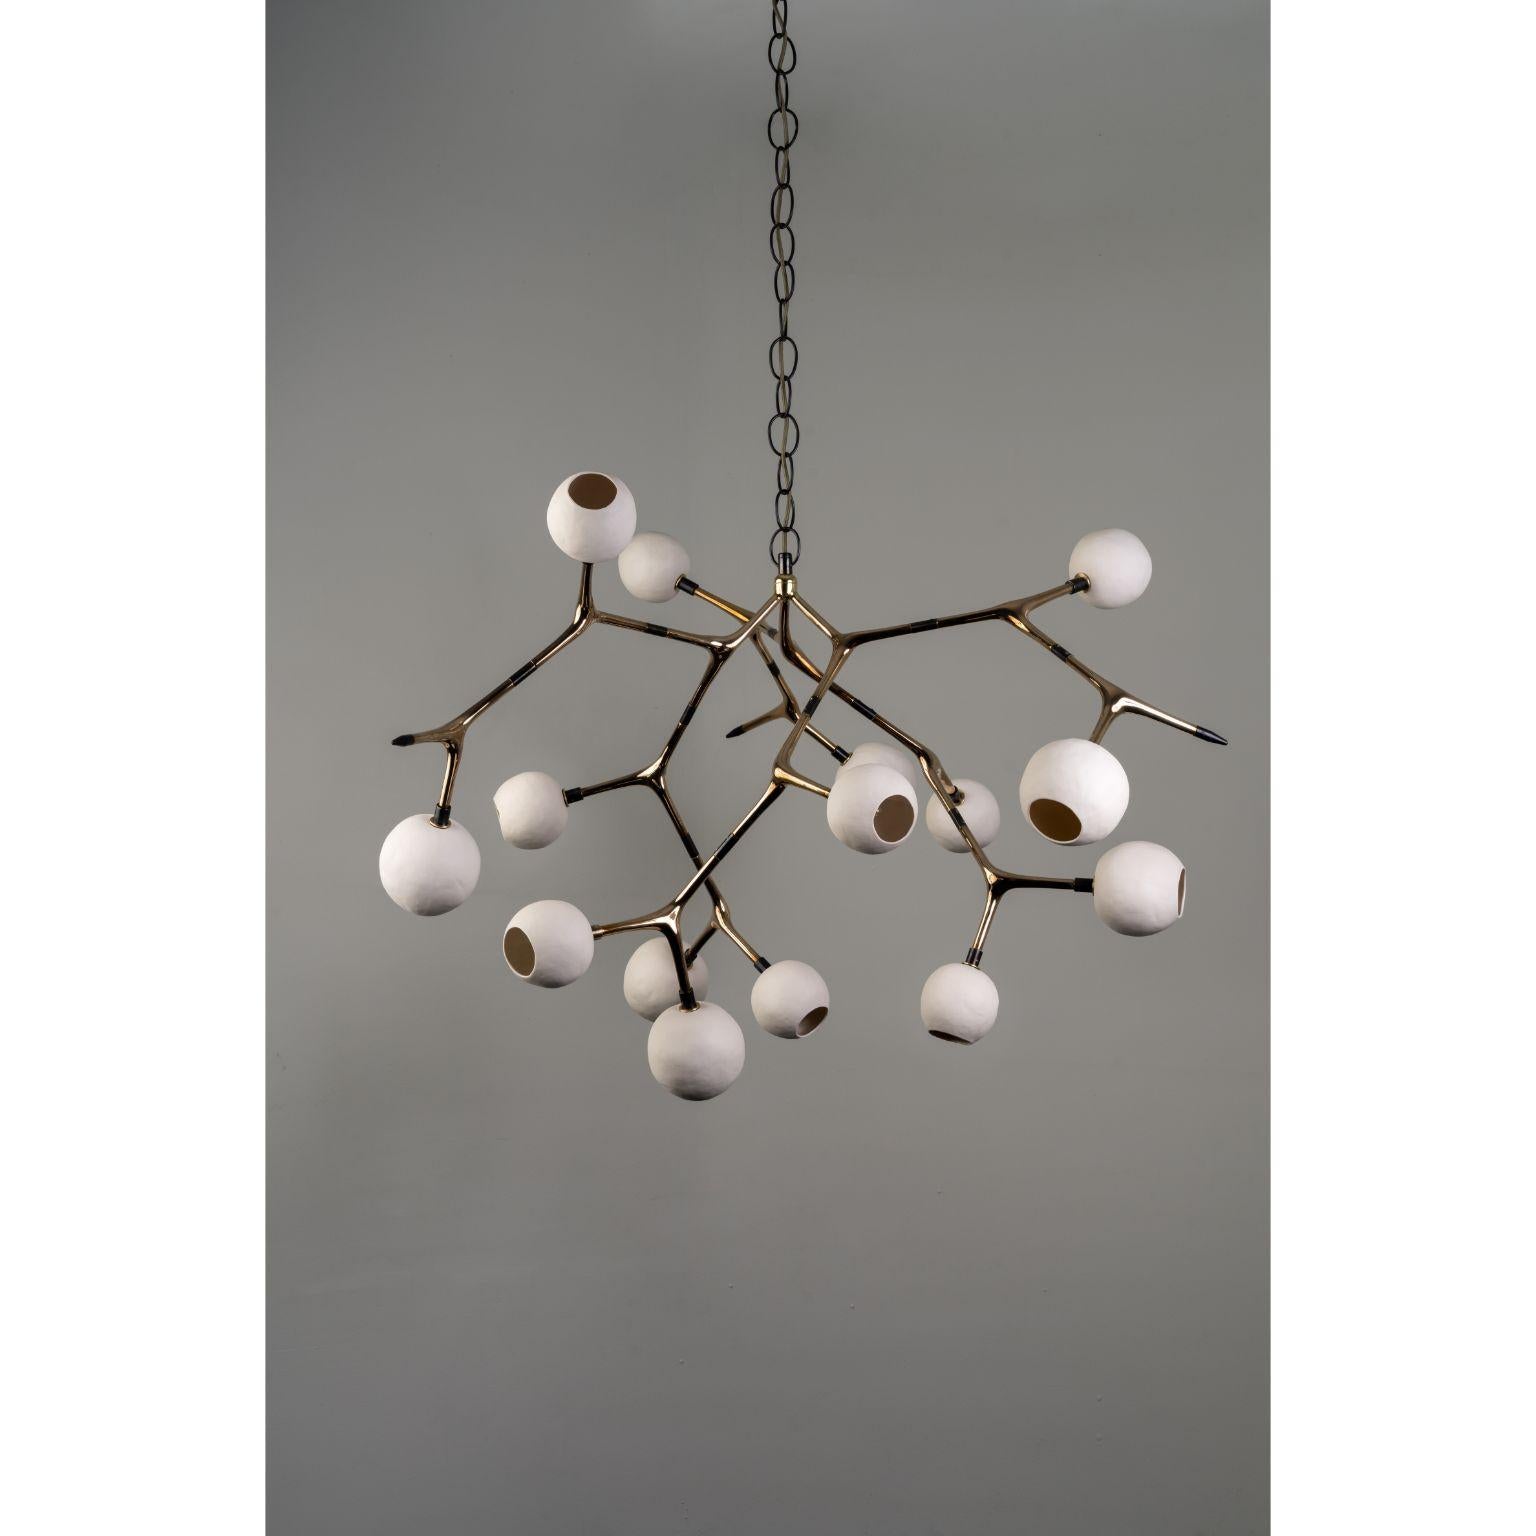 Porcelain and Polished Bronze Maratus 15 Pendant Lamp by Isabel Moncada
Dimensions: Ø 135 x H 160 cm.
Materials: Cast bronze, blown glass and turned brass.
Weight: 20 kg.

The image of a swarm of small lights at night is mesmerizing. Maratus 15 is a